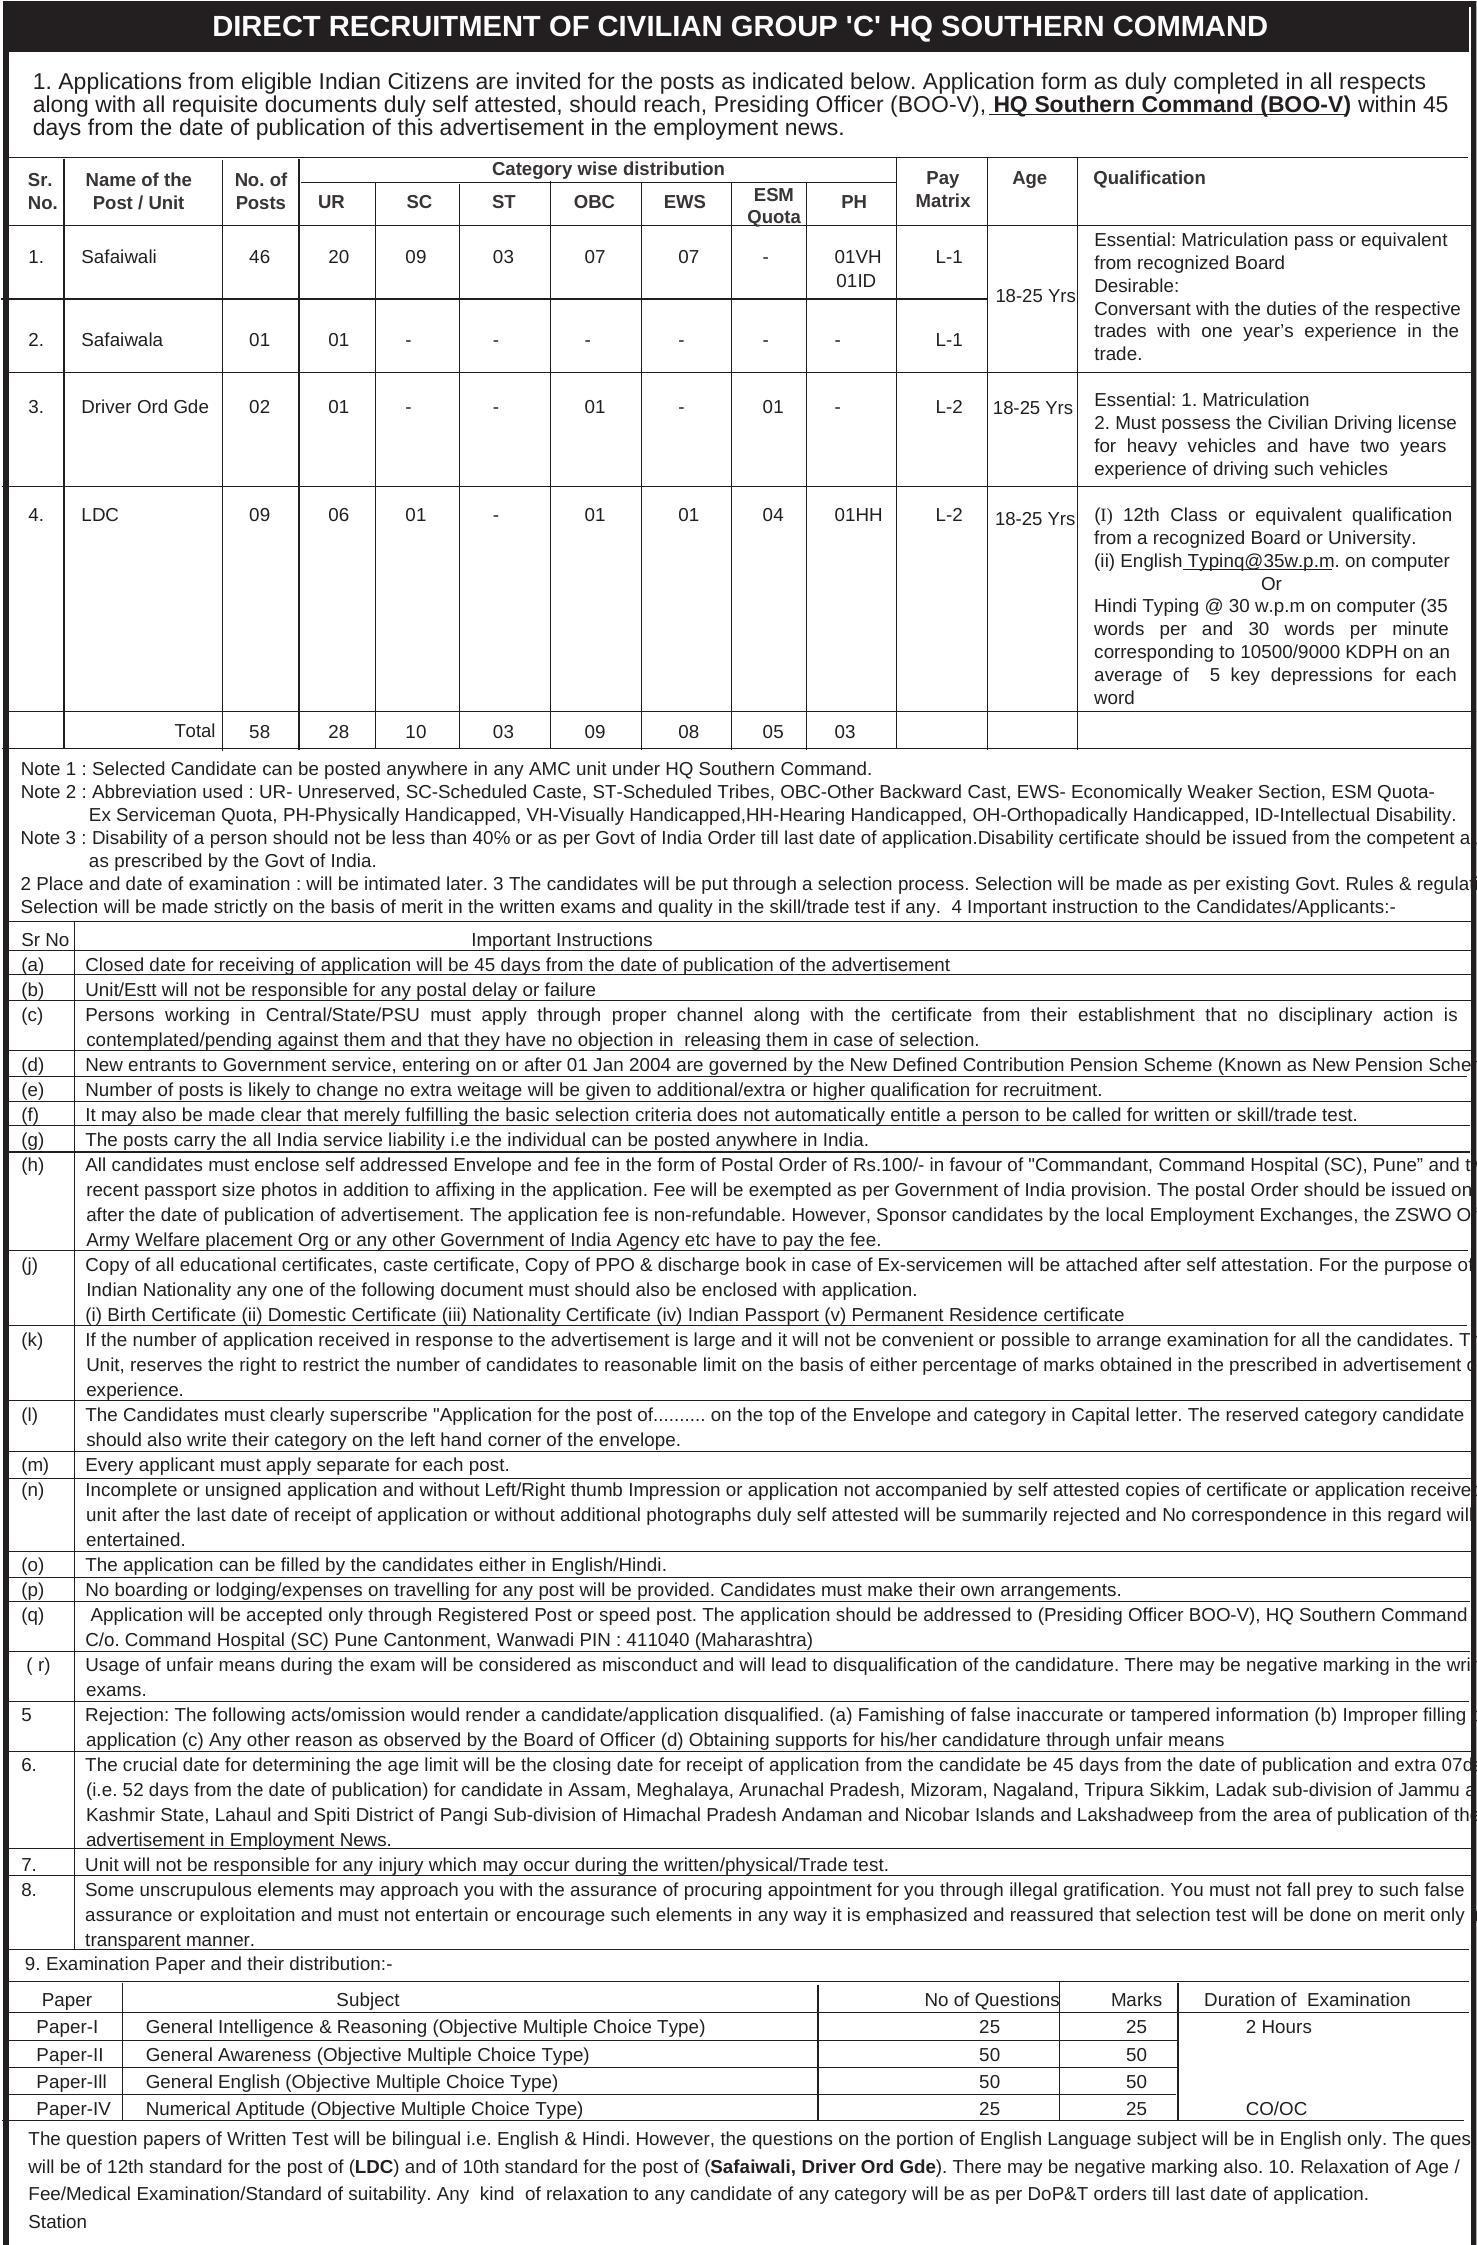 HQ Southern Command Group C Recruitment 2022 [58 Posts] Notification and Offline Application Form - Page 2